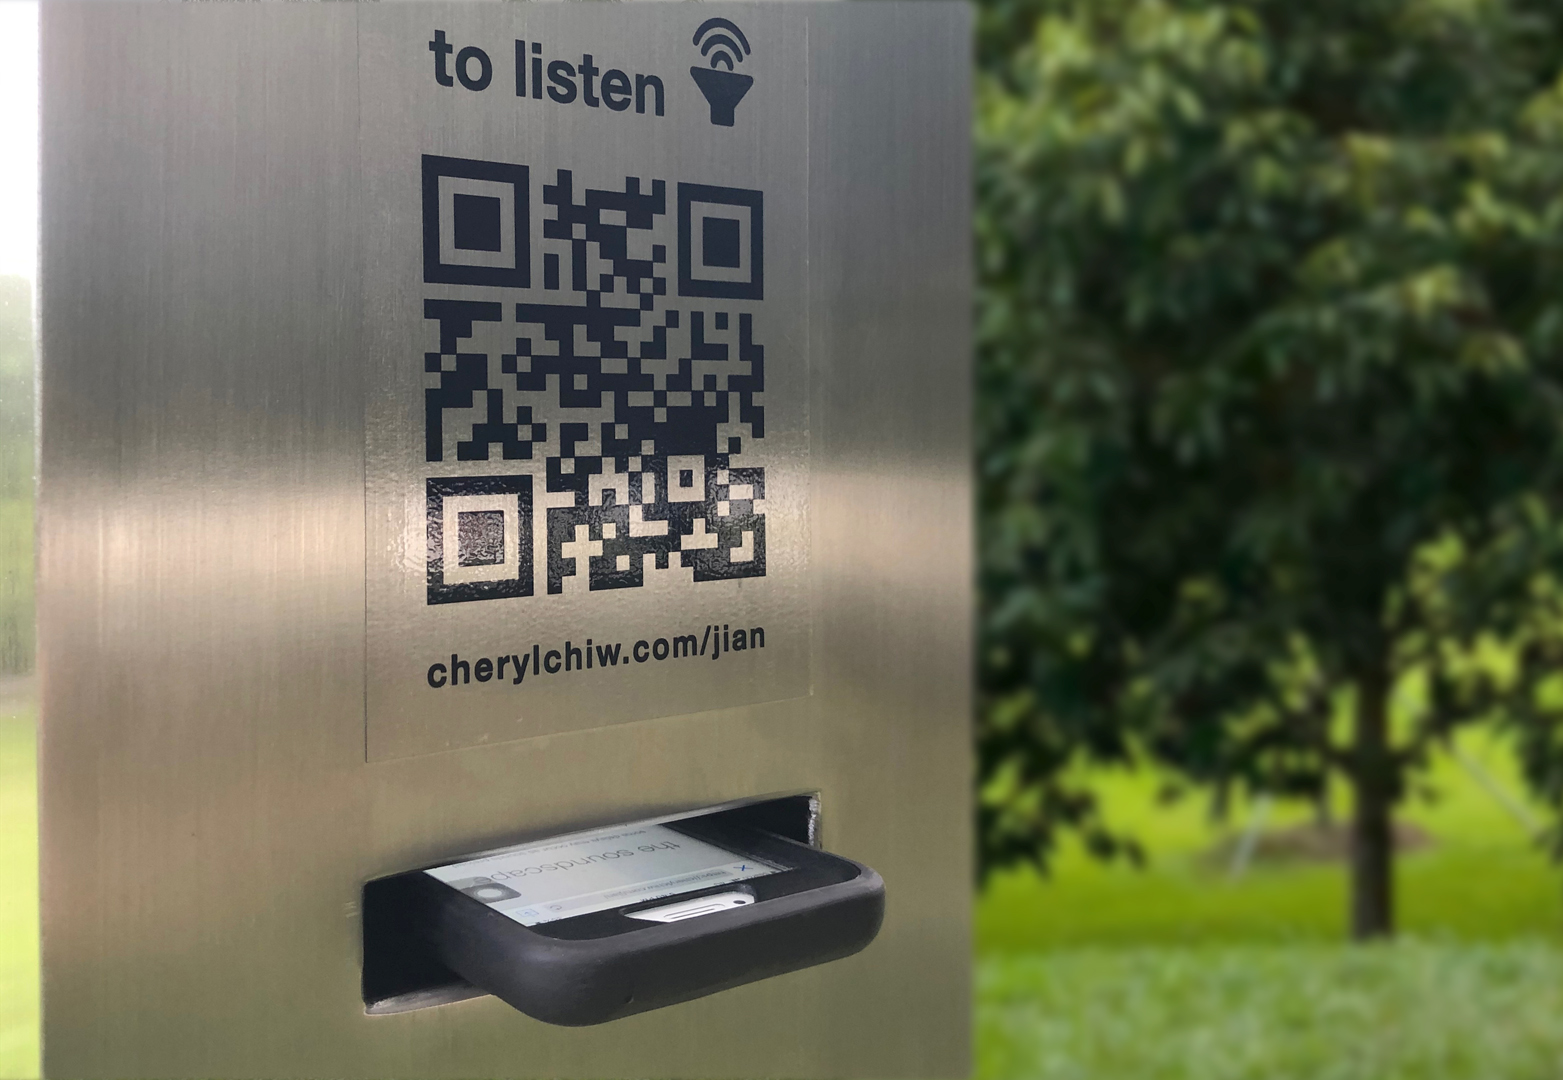 A phone placed in the slot of jian rewritten, the sculpture @ Punggol Waterway Park, slot for phone playing soundscape